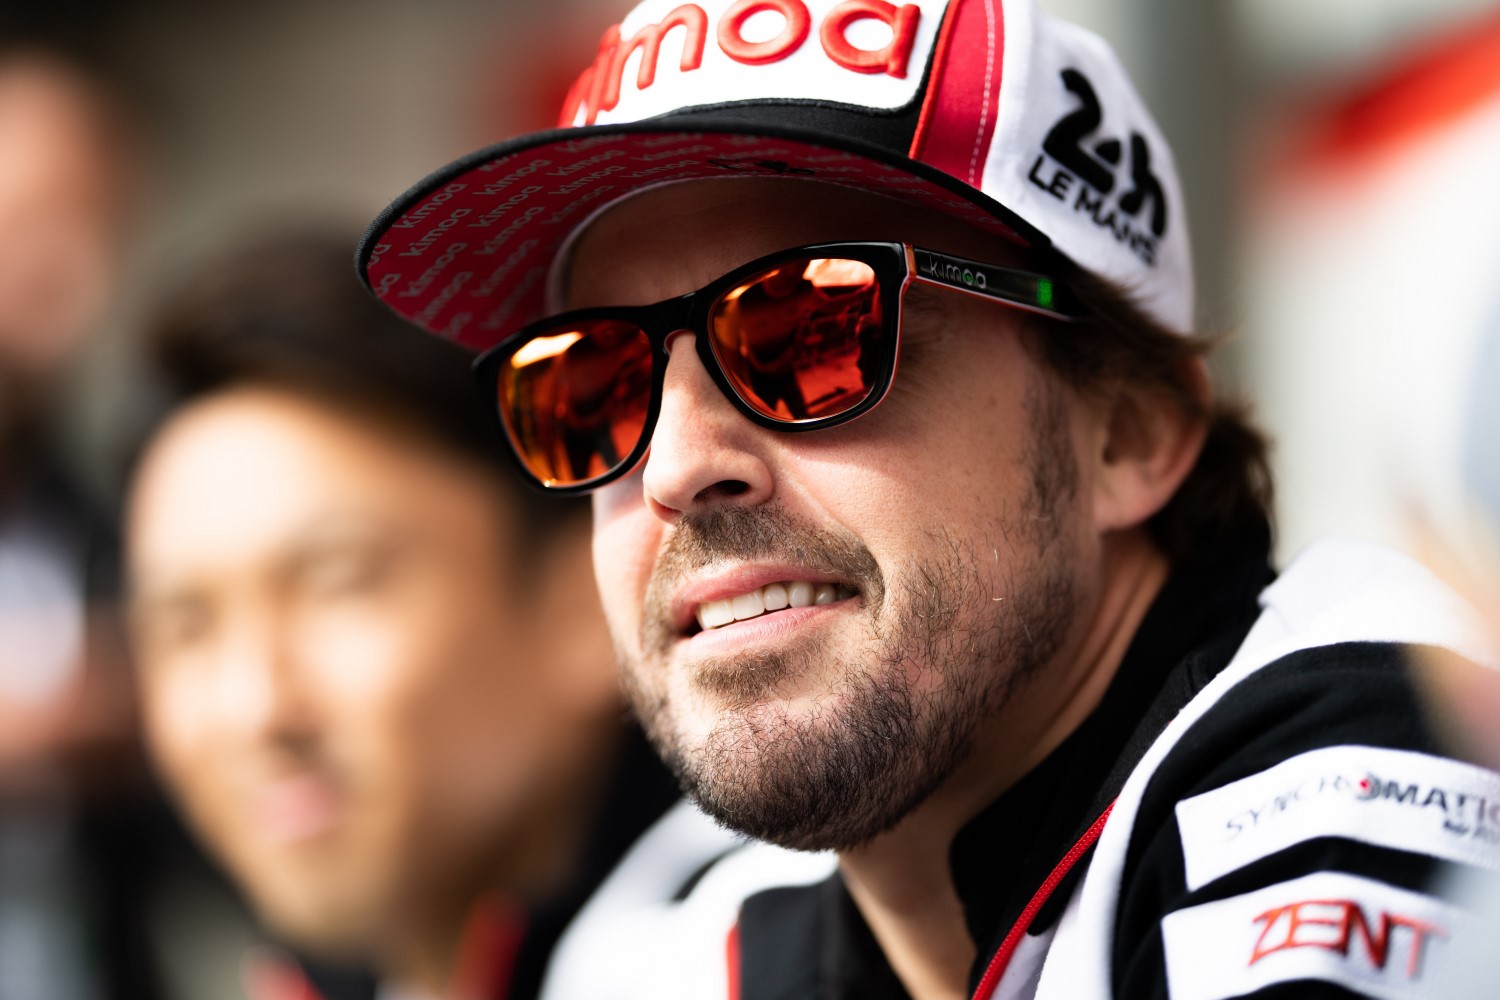 No F1 for Alonso